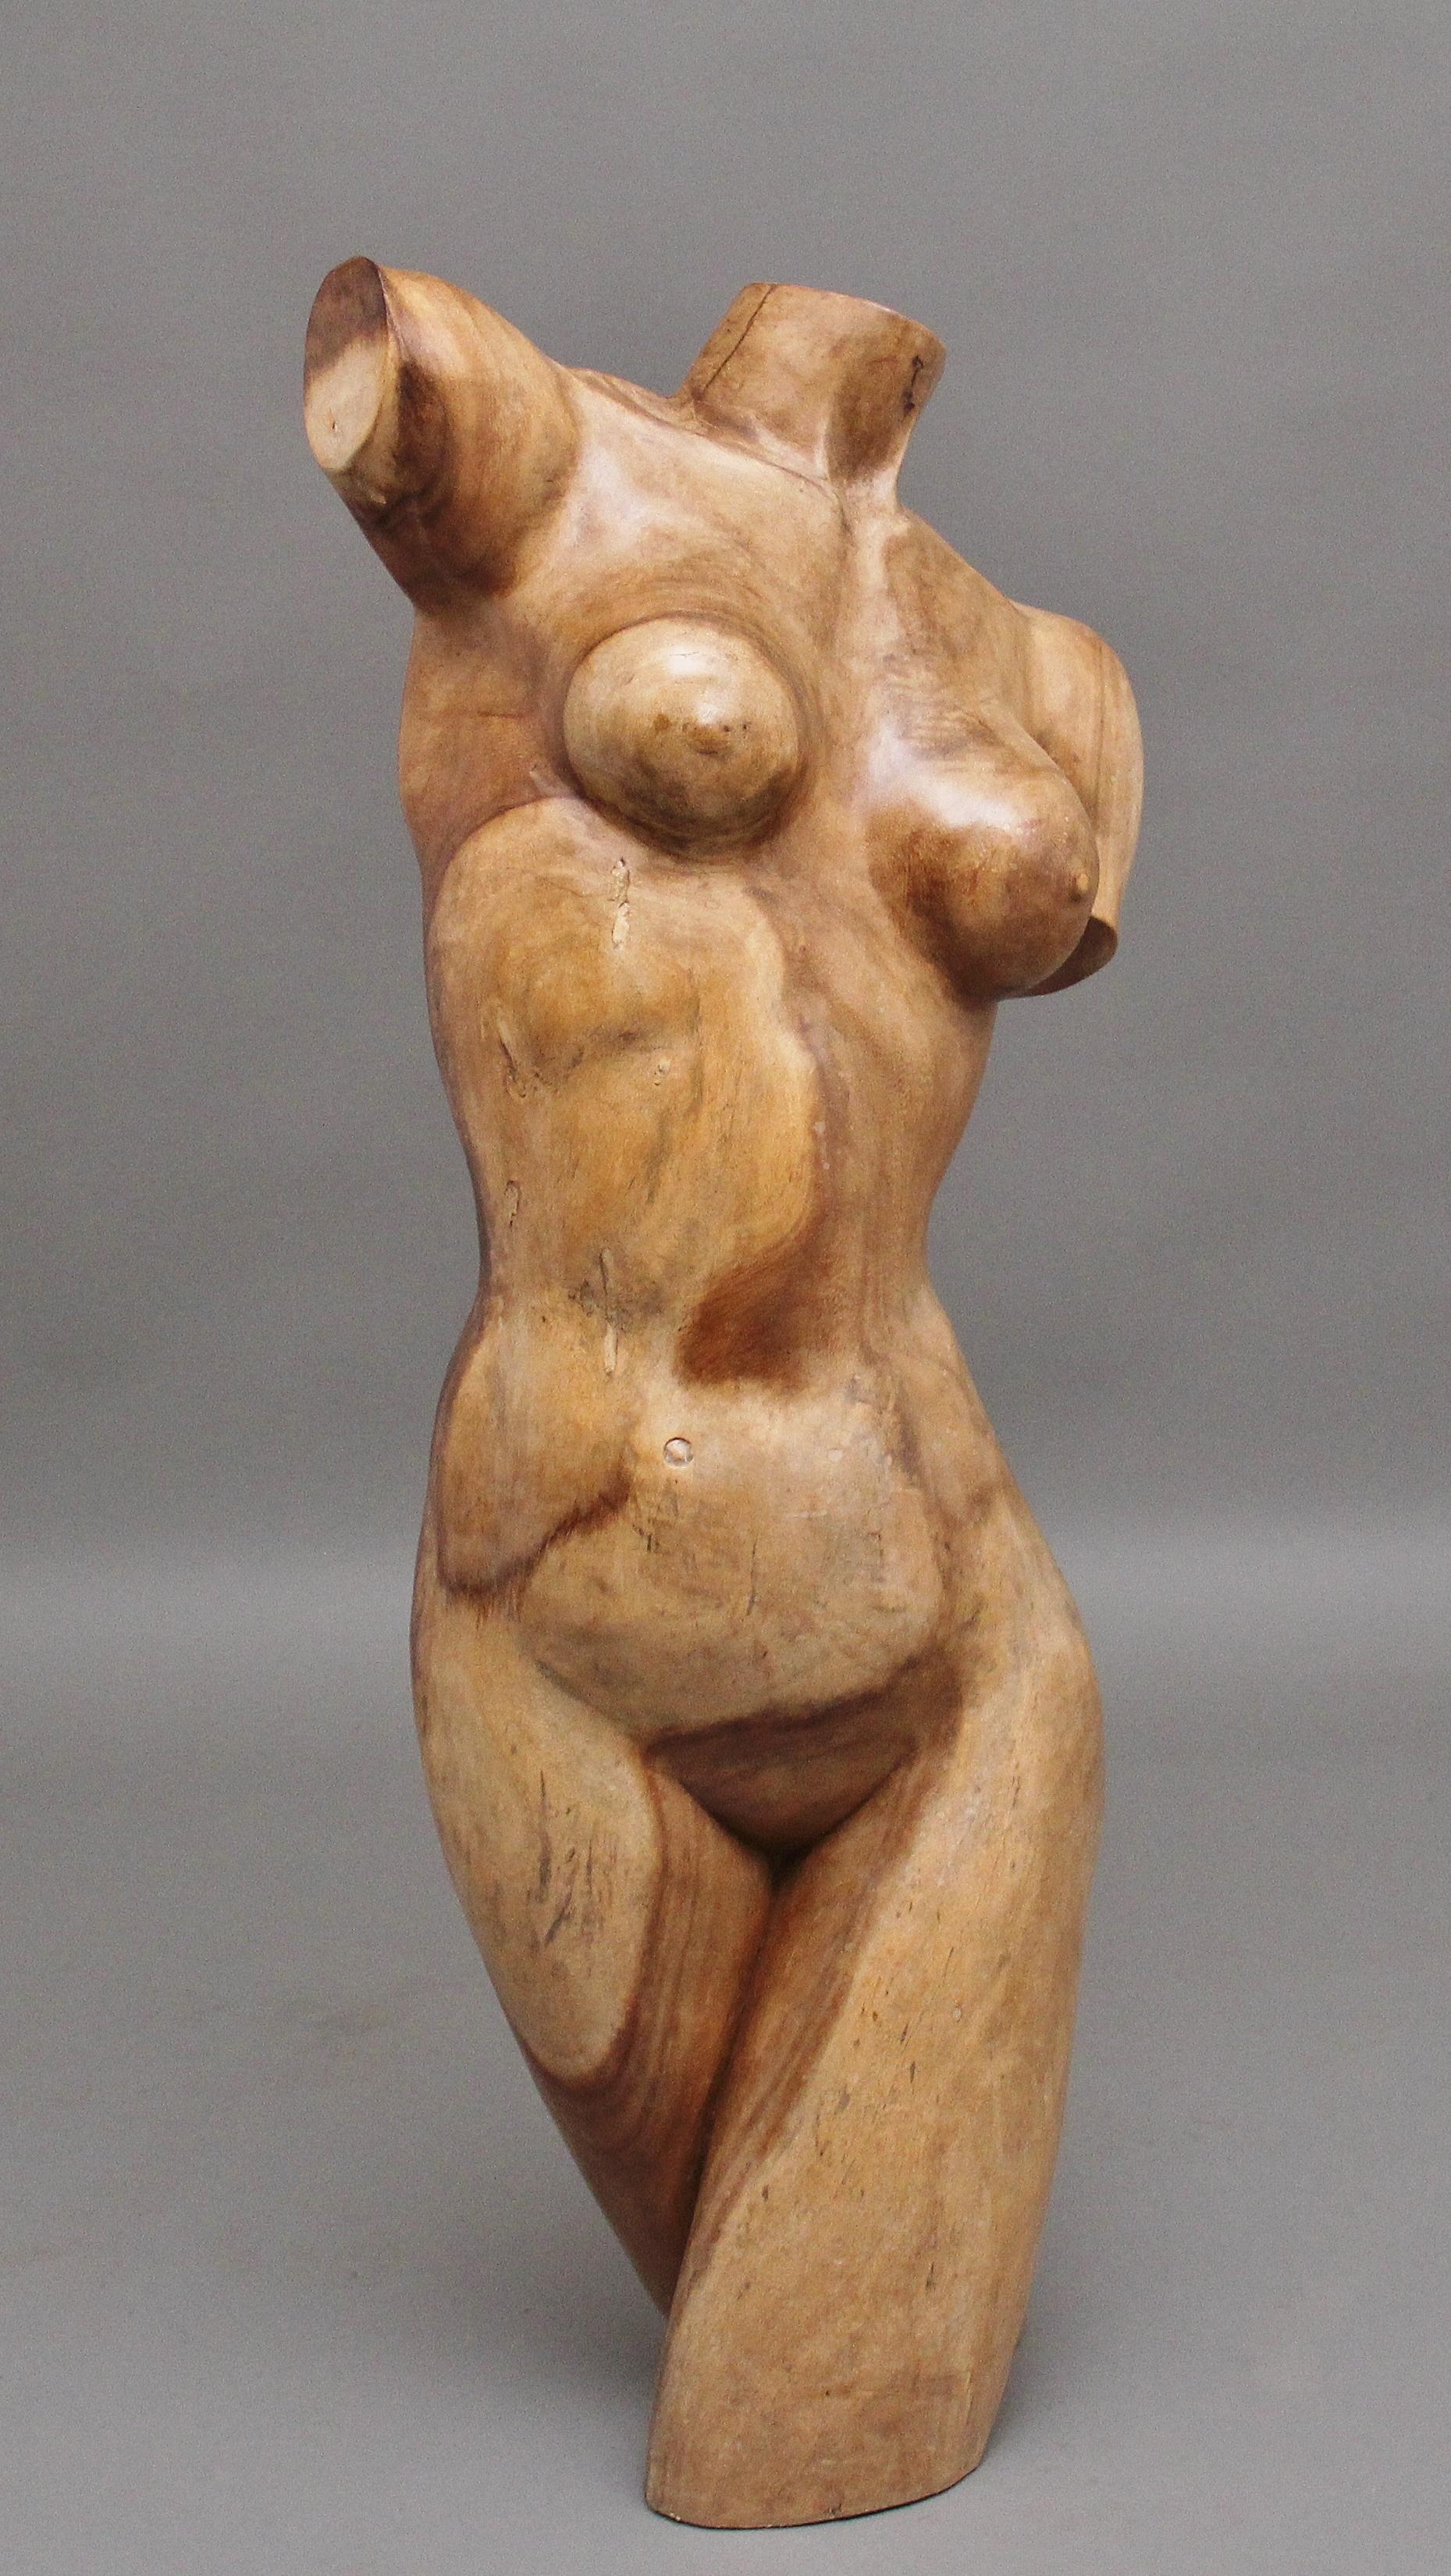 A fabulous quality Early 20th Century life size carved female torso in the classical style, very well executed in wonderfully figured walnut, the sculpture is in excellent condition and has a wonderful warm walnut colour, circa 1930.